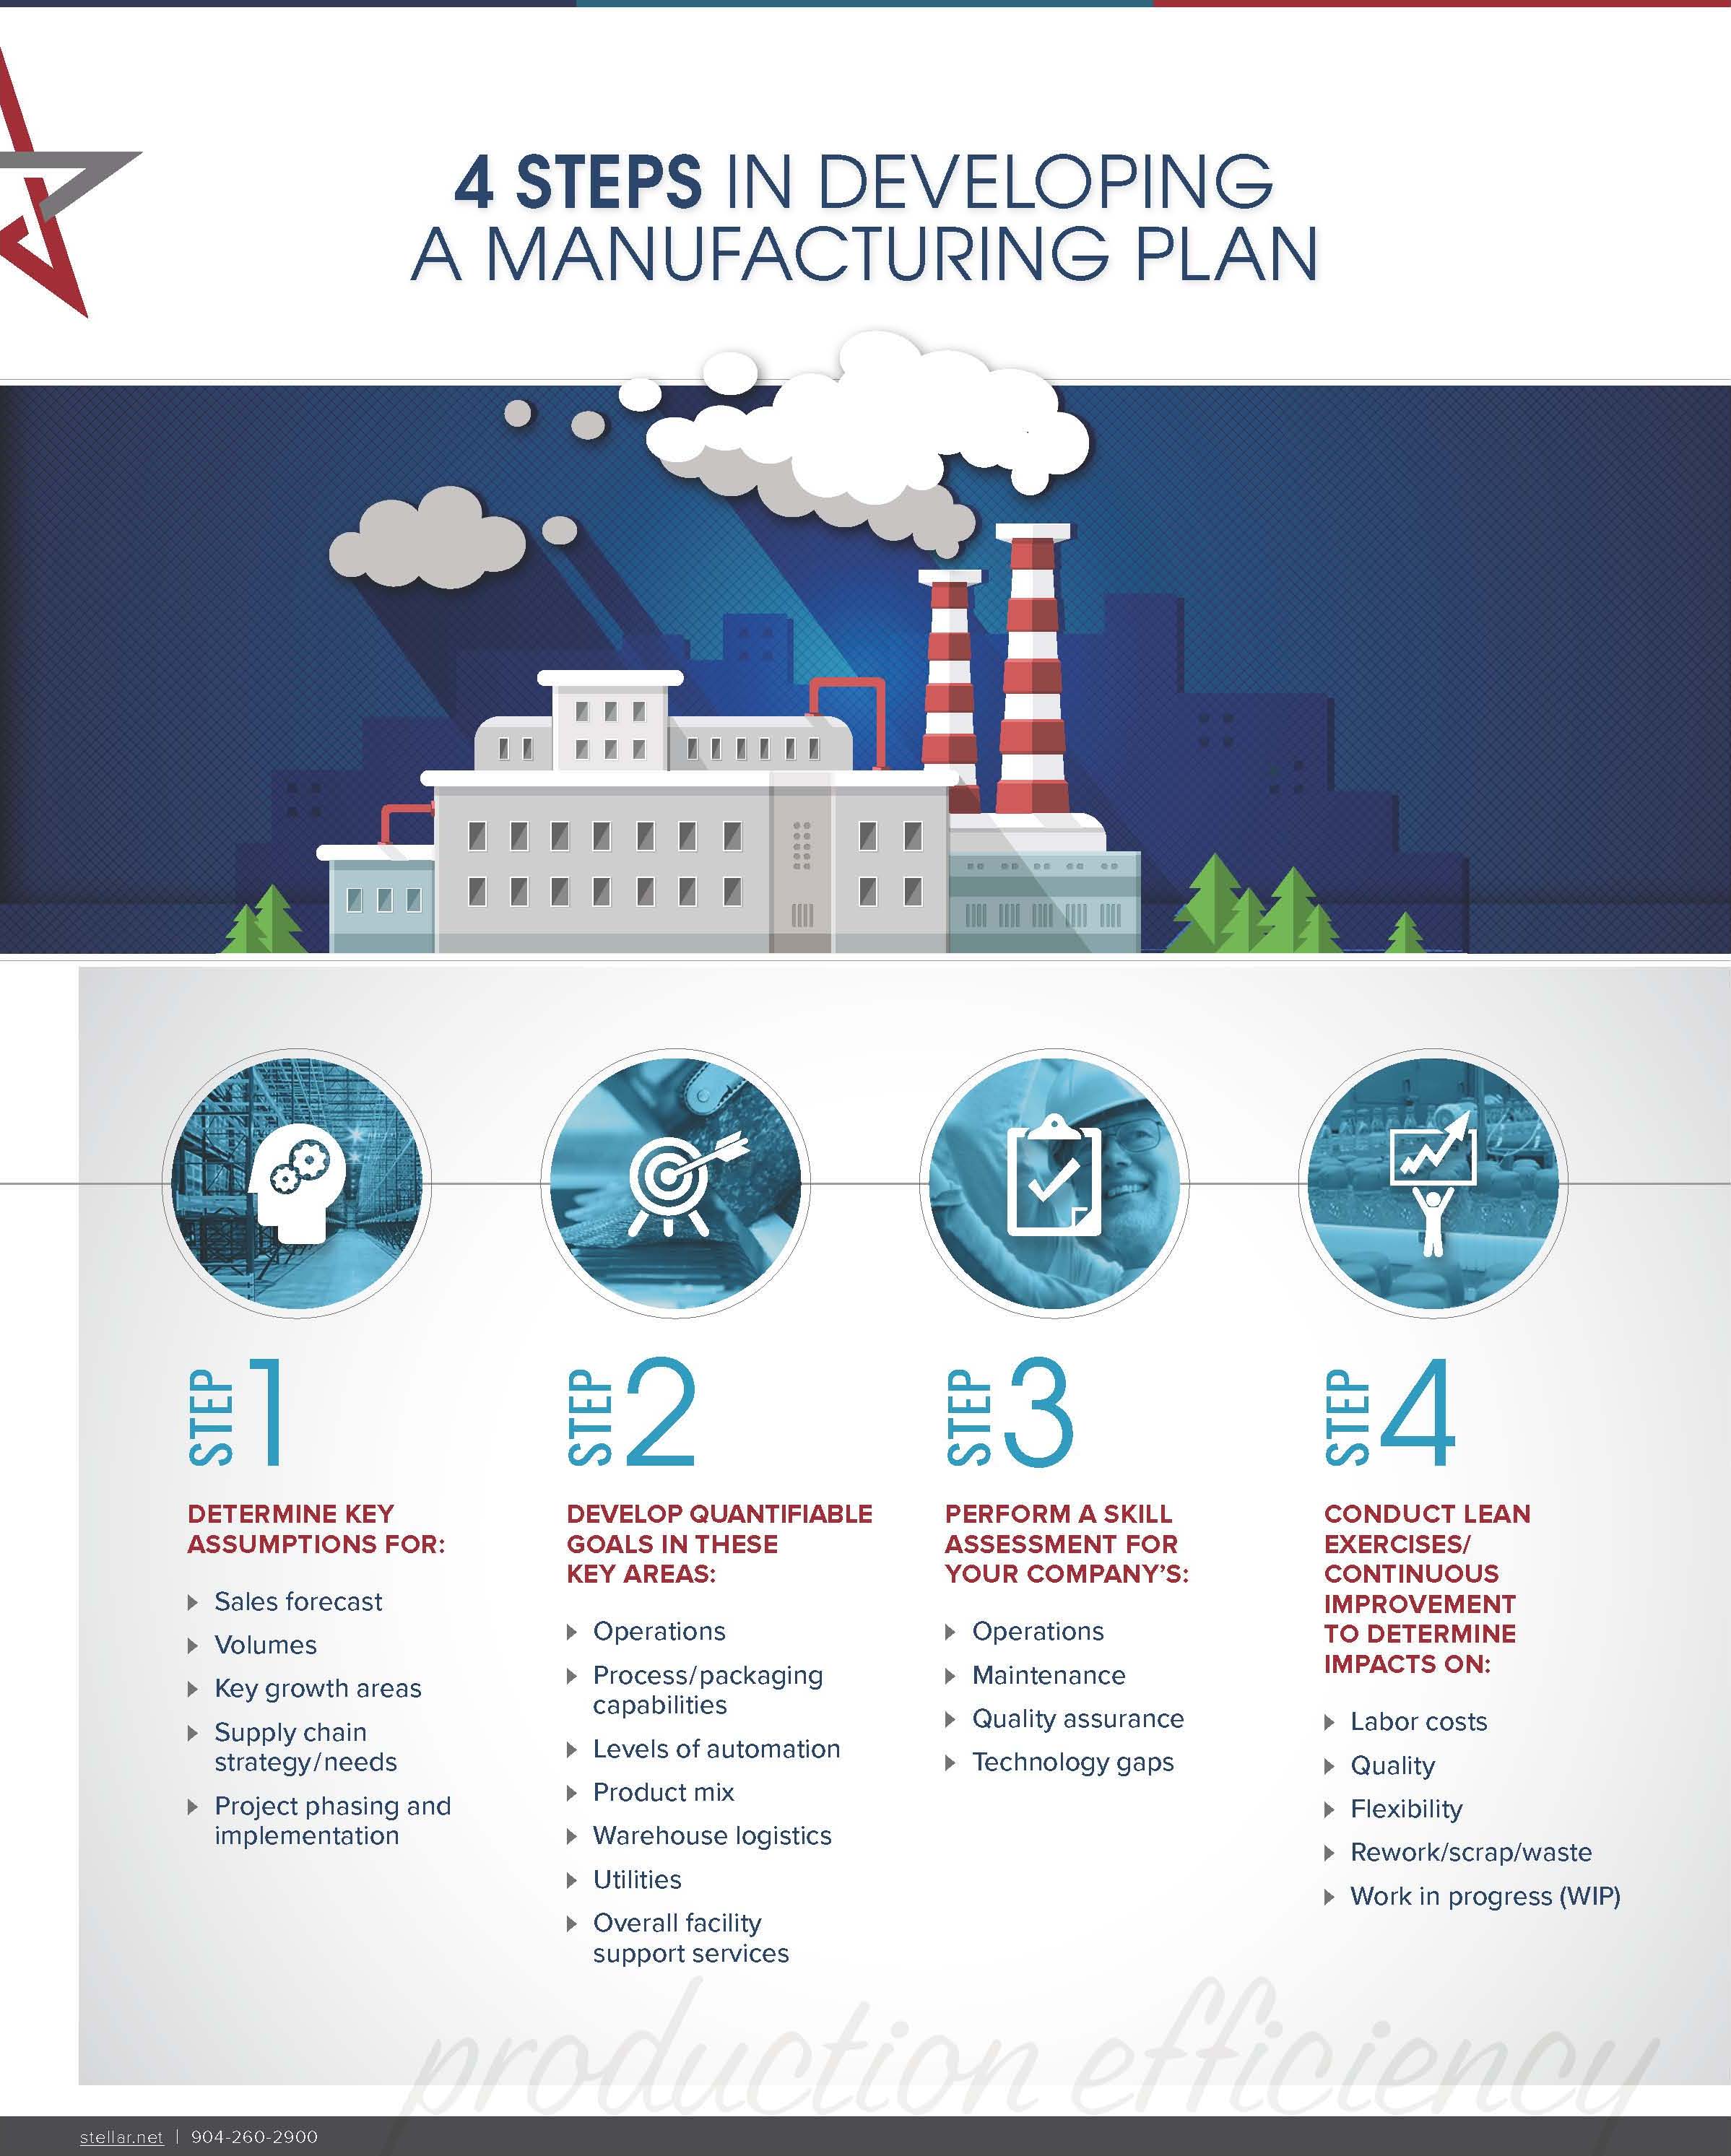 [Infographic] 4 Steps in Developing a Manufacturing Plan